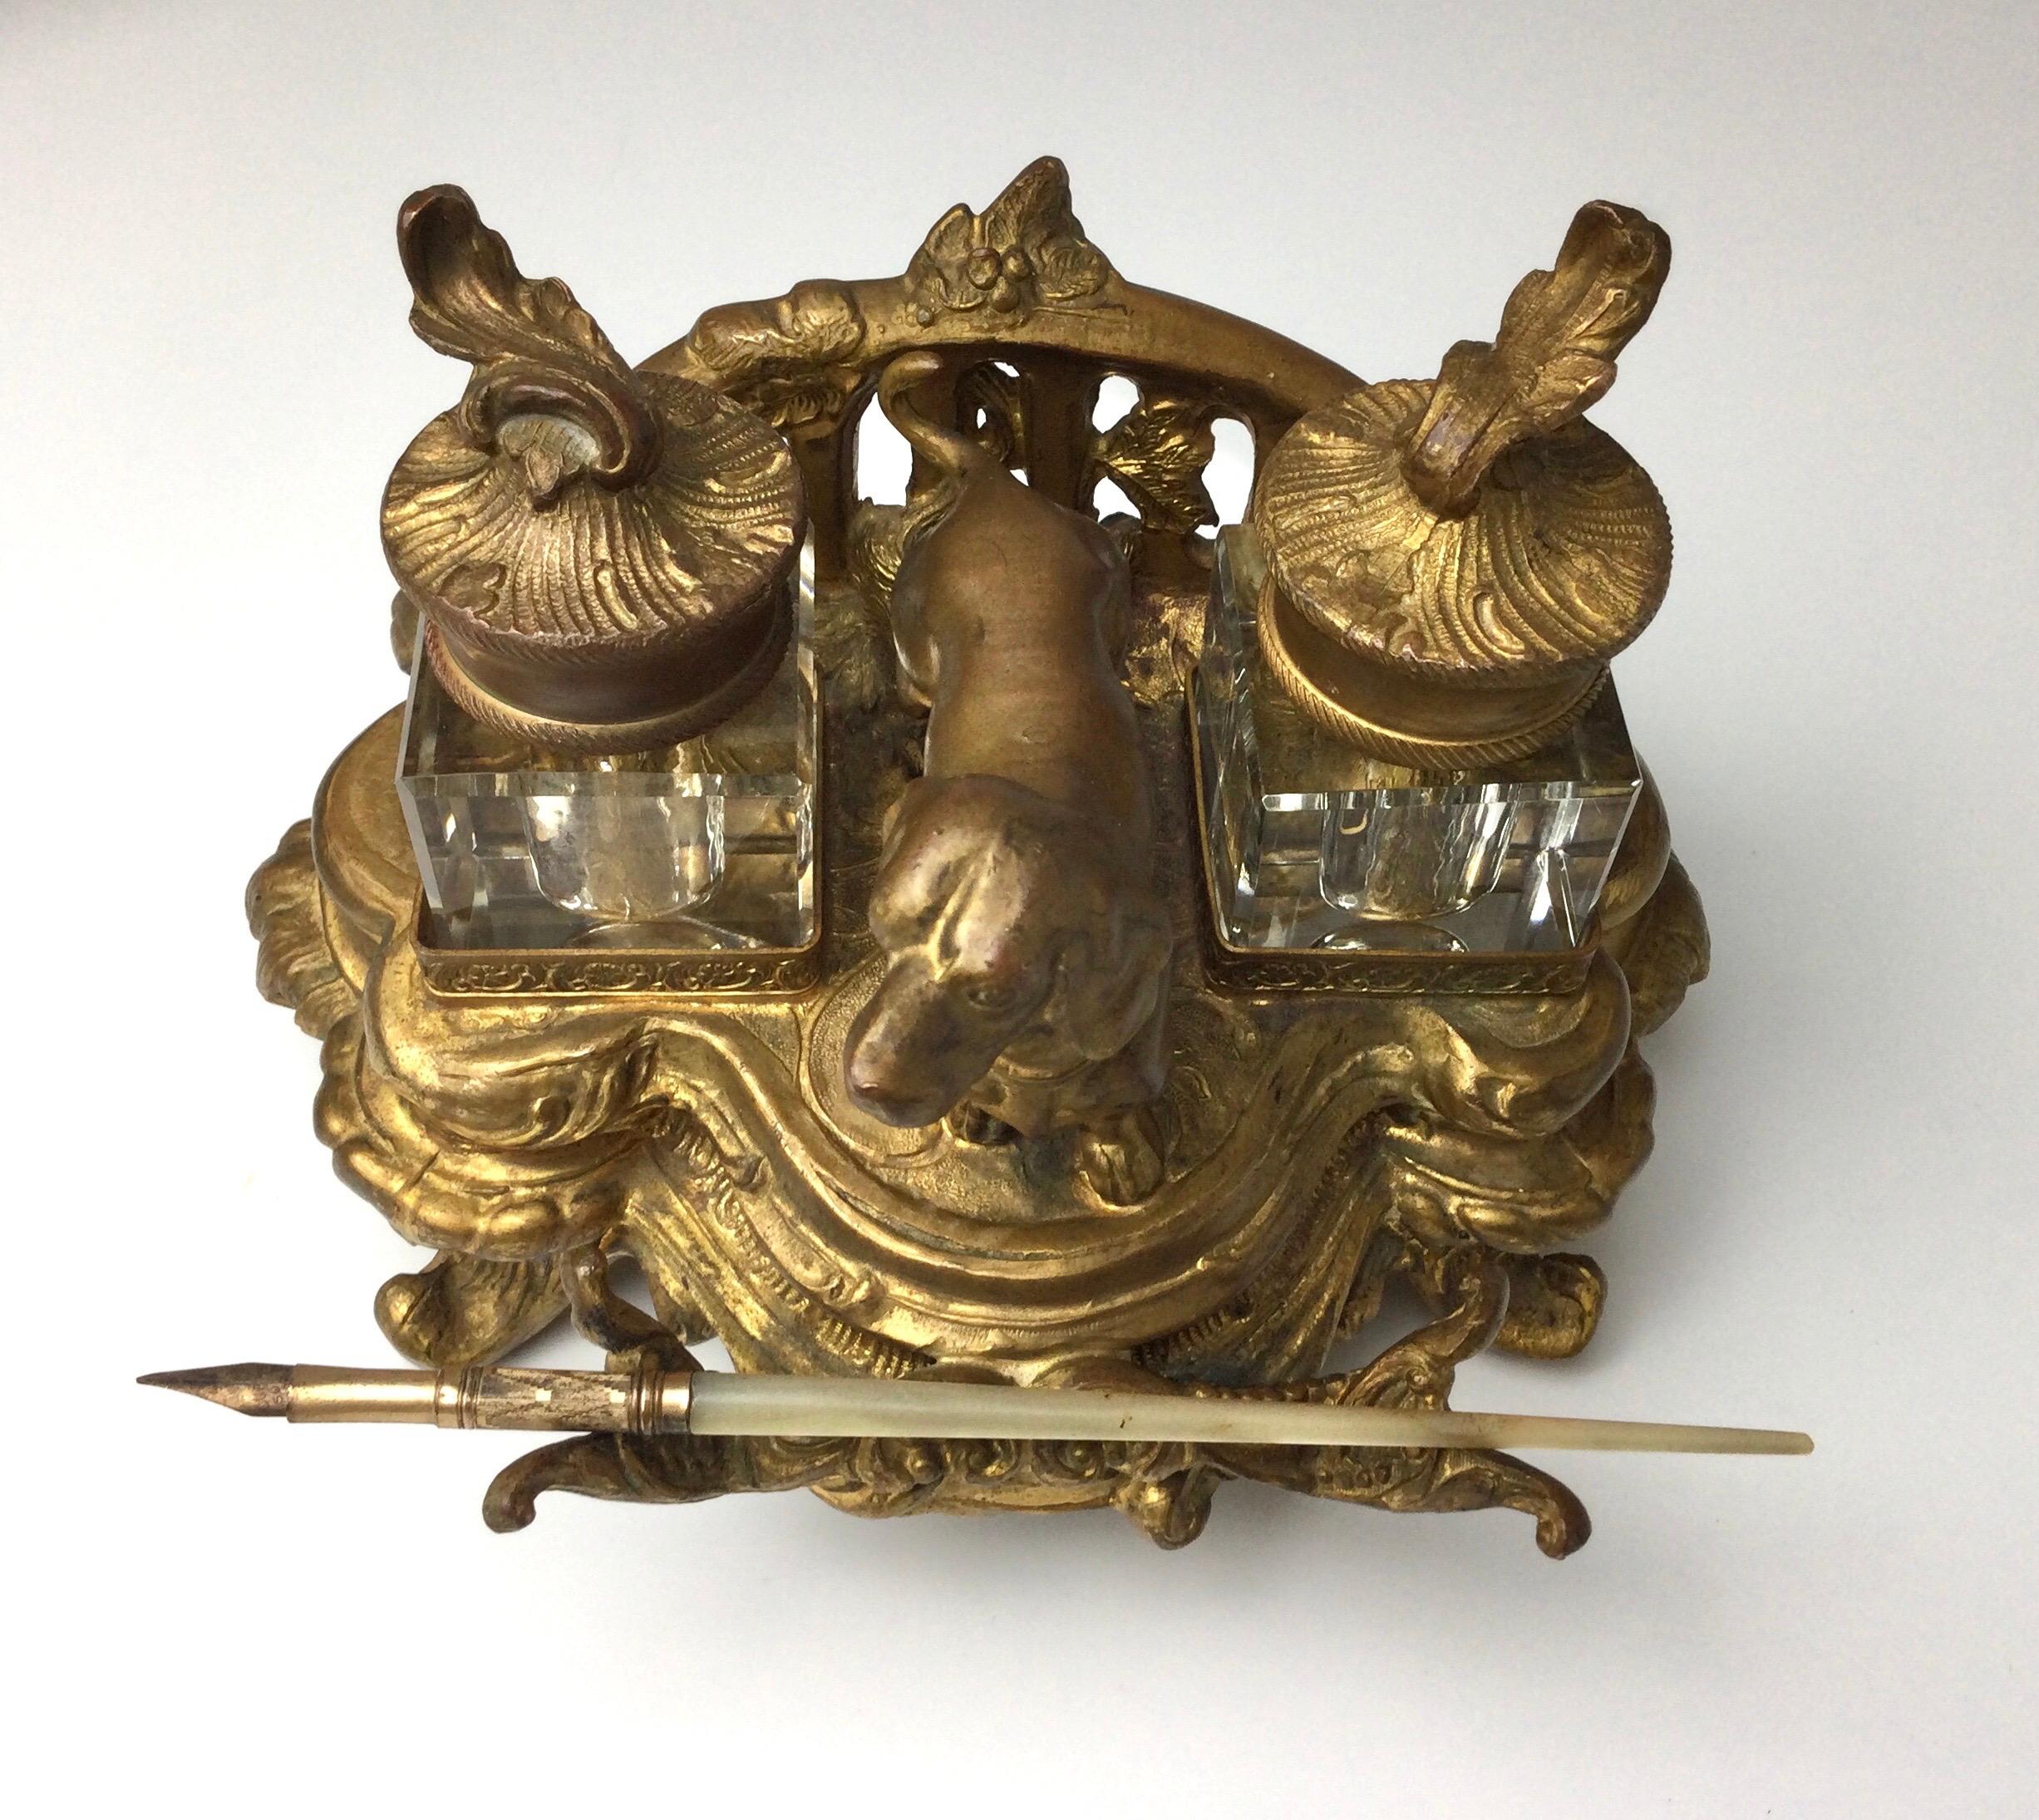 Antique gilt metal double glass inkwells with dachshund dog in nice age appropriate condition. The gilt has a nice patina, late 1800s. Measures: 6 1/2” wide by 4 1/2” deep by 4 1/2” to top of finial. Glass inkwells are removable with no chips or